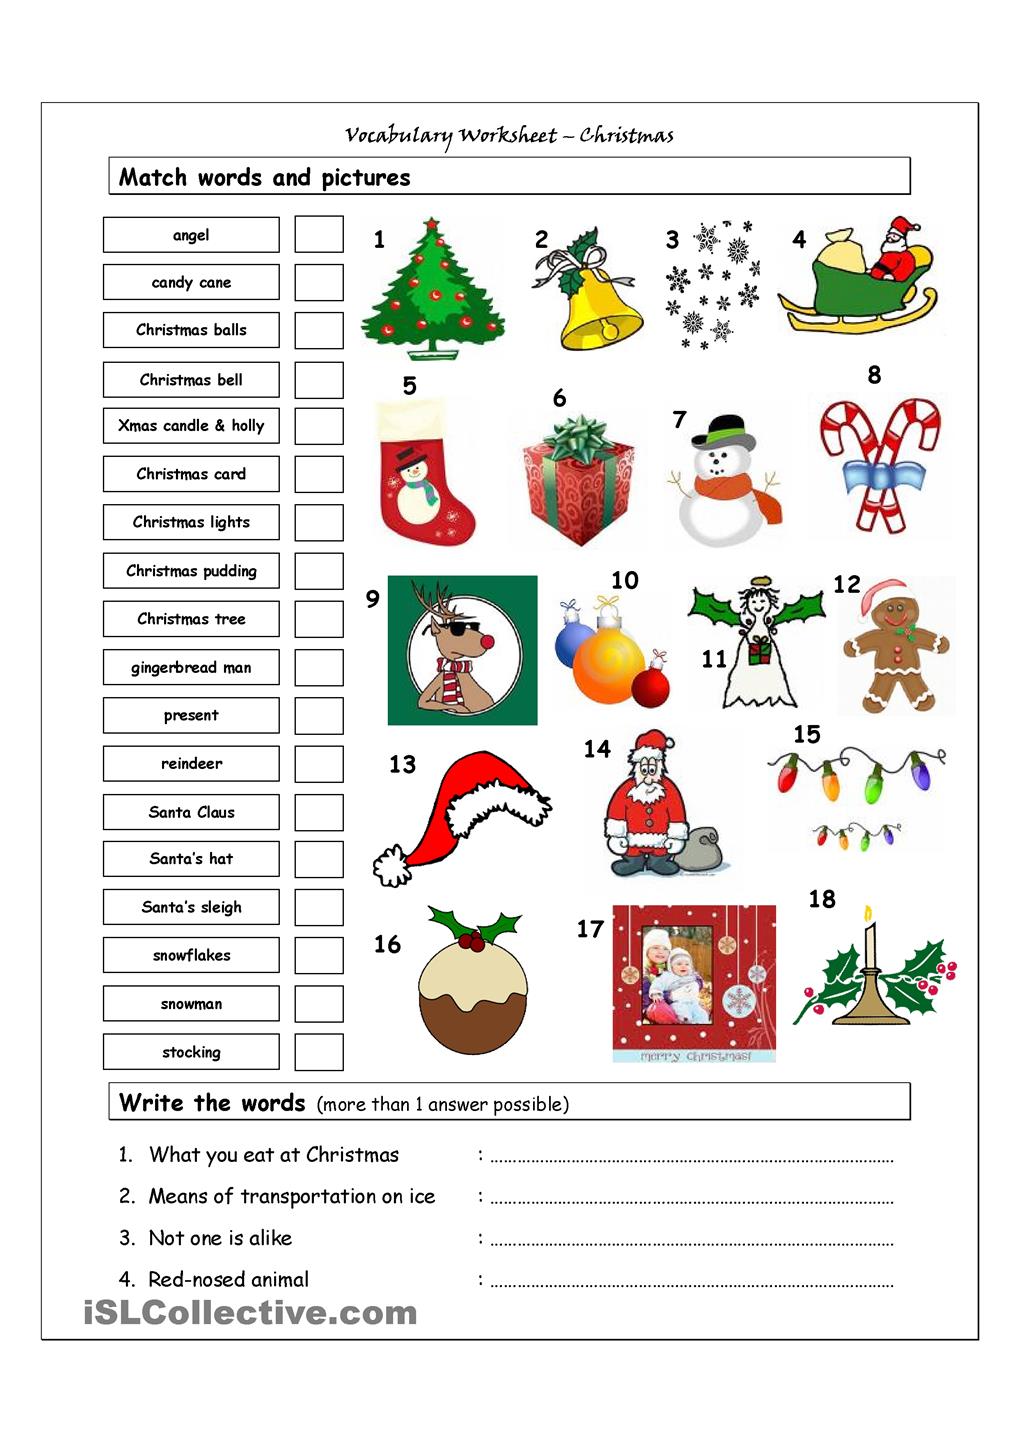 Worksheets On Christmas Worksheets For All